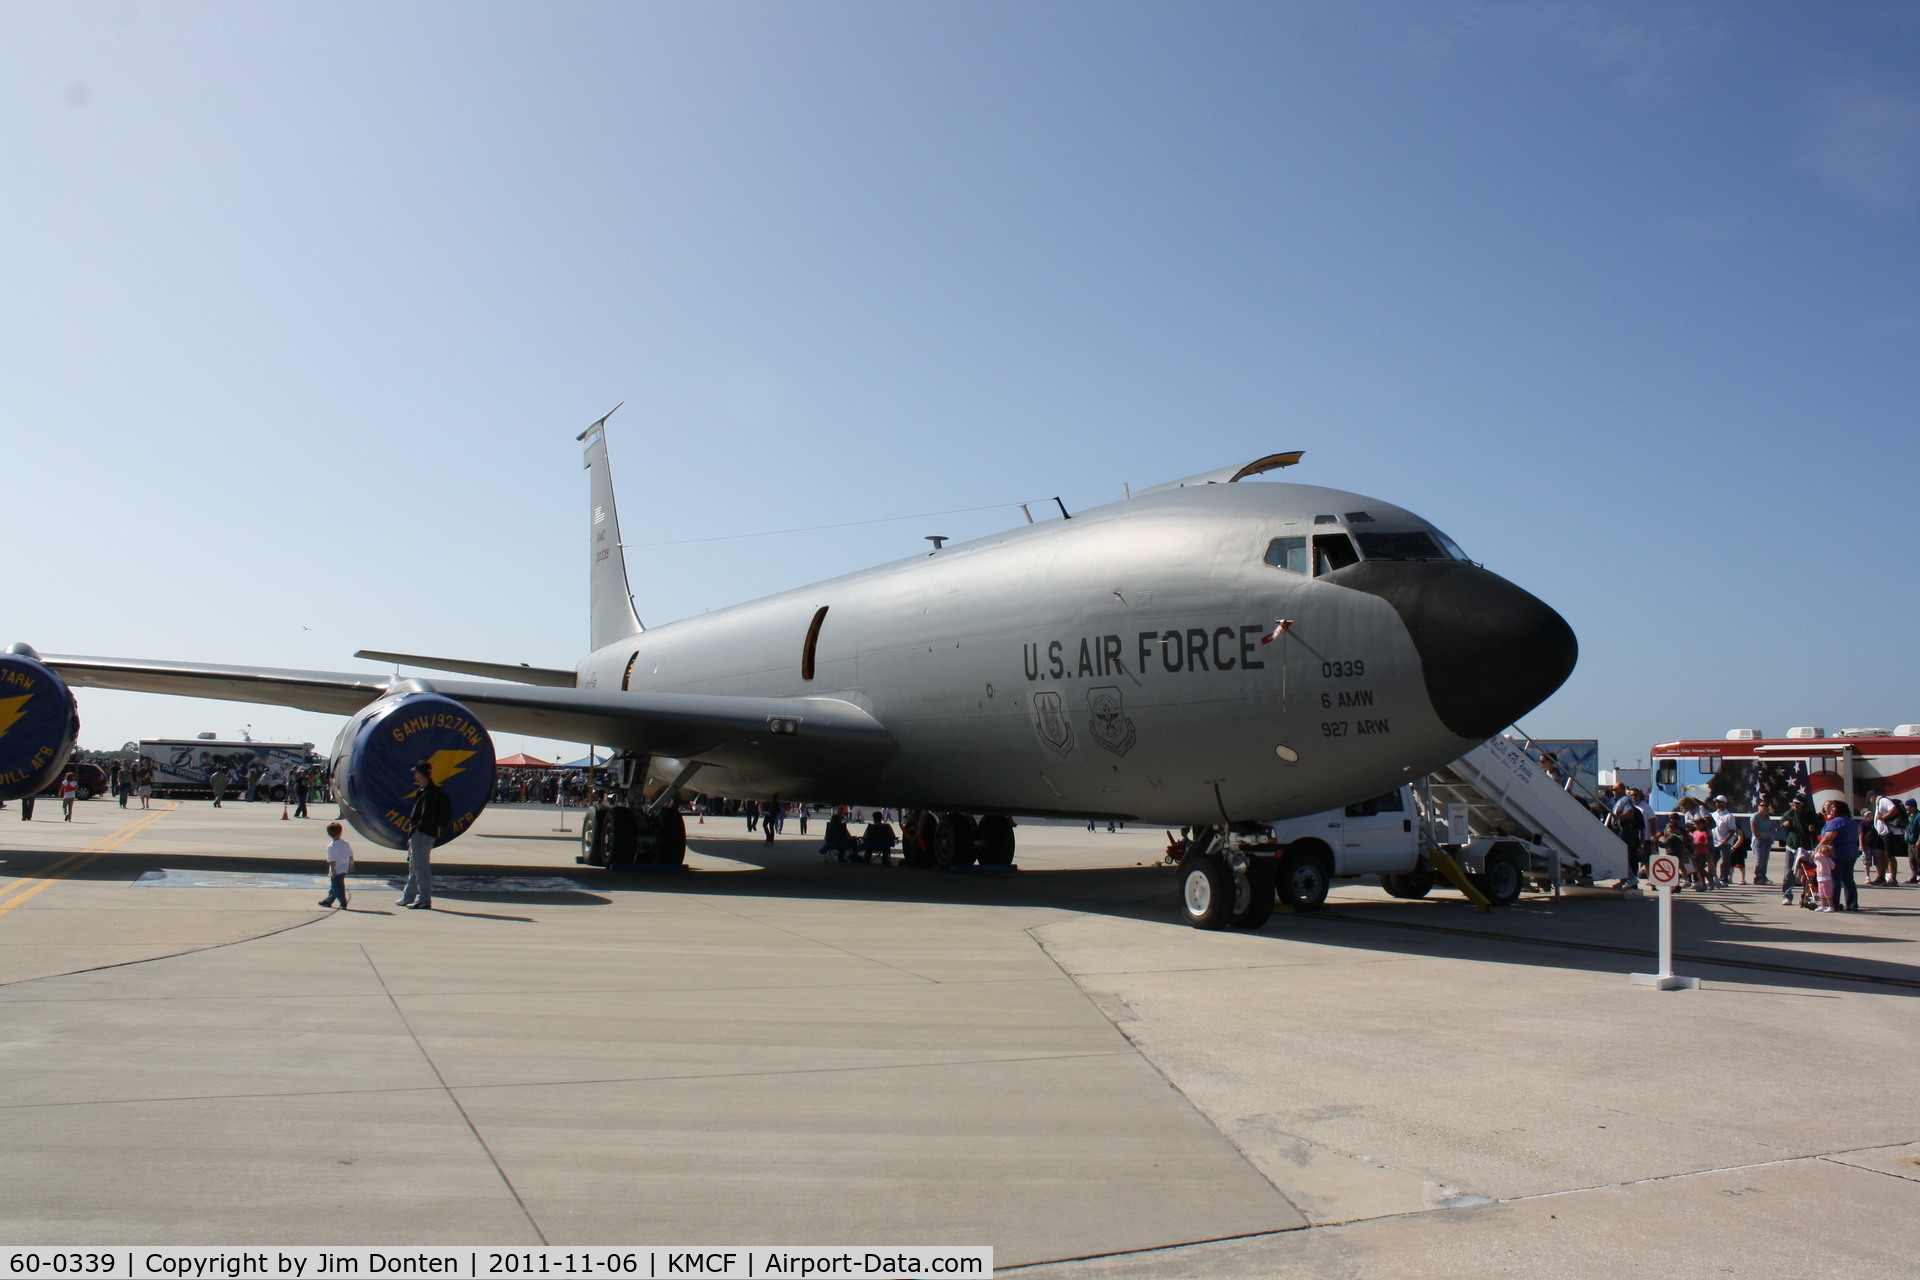 60-0339, 1960 Boeing KC-135R Stratotanker C/N 18114, KC-135 Stratotanker (60-0339) from the 6th Air Mobility Wing/927th Air Refueling Wing sits on display at MacDill Air Fest